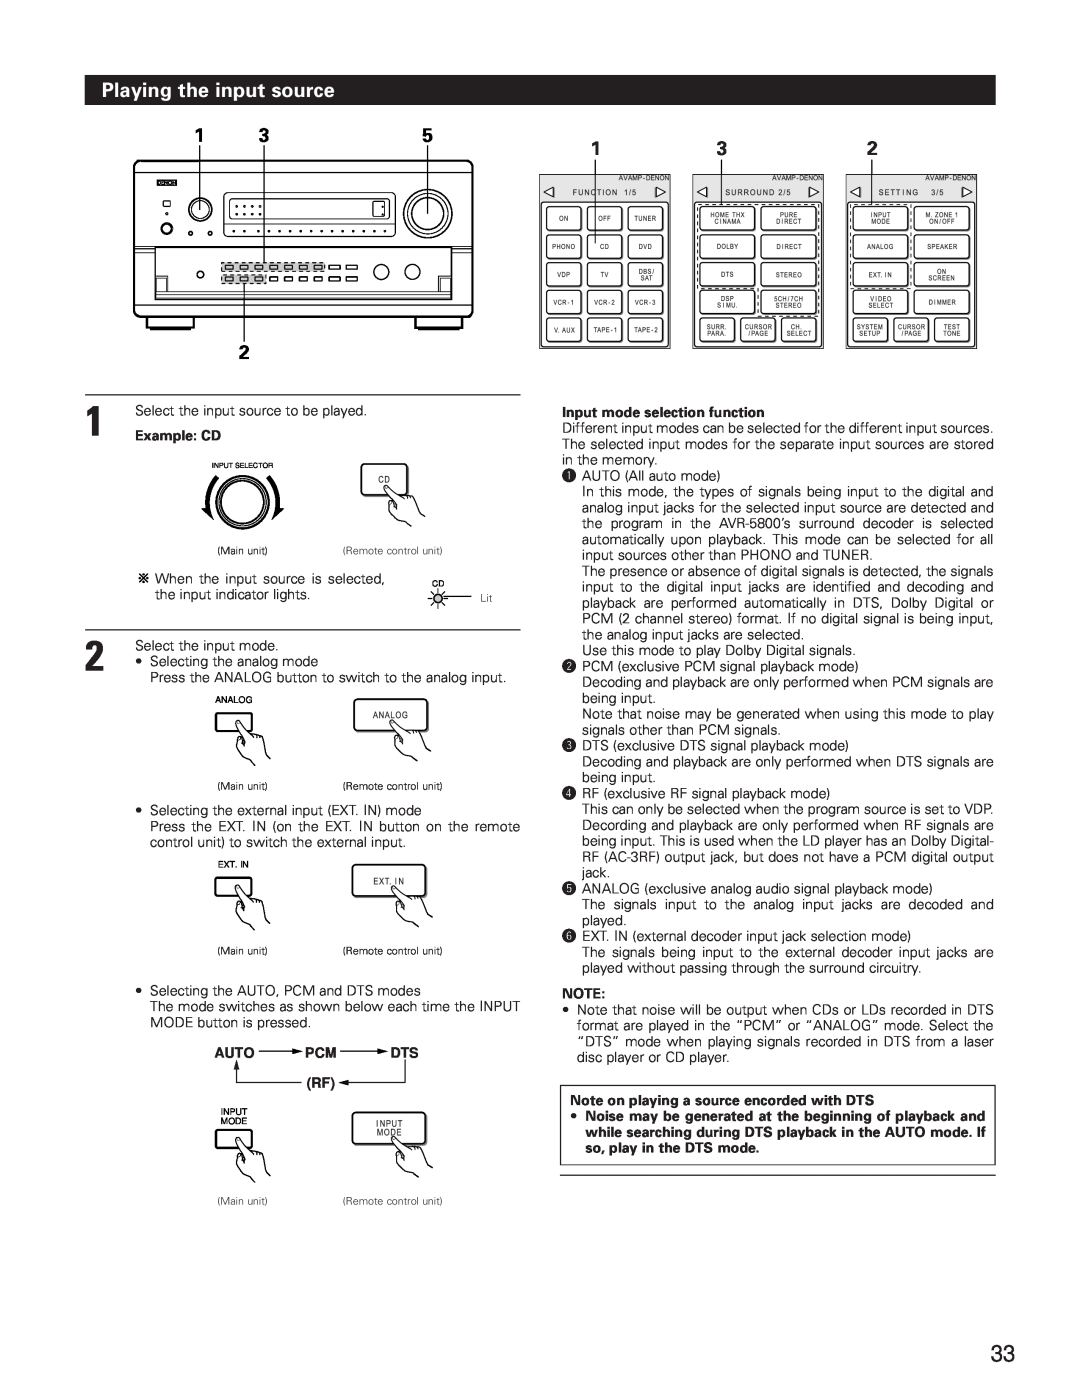 Denon AVR-5800 operating instructions Playing the input source, Example CD, Auto Pcm Dts Rf, Input mode selection function 